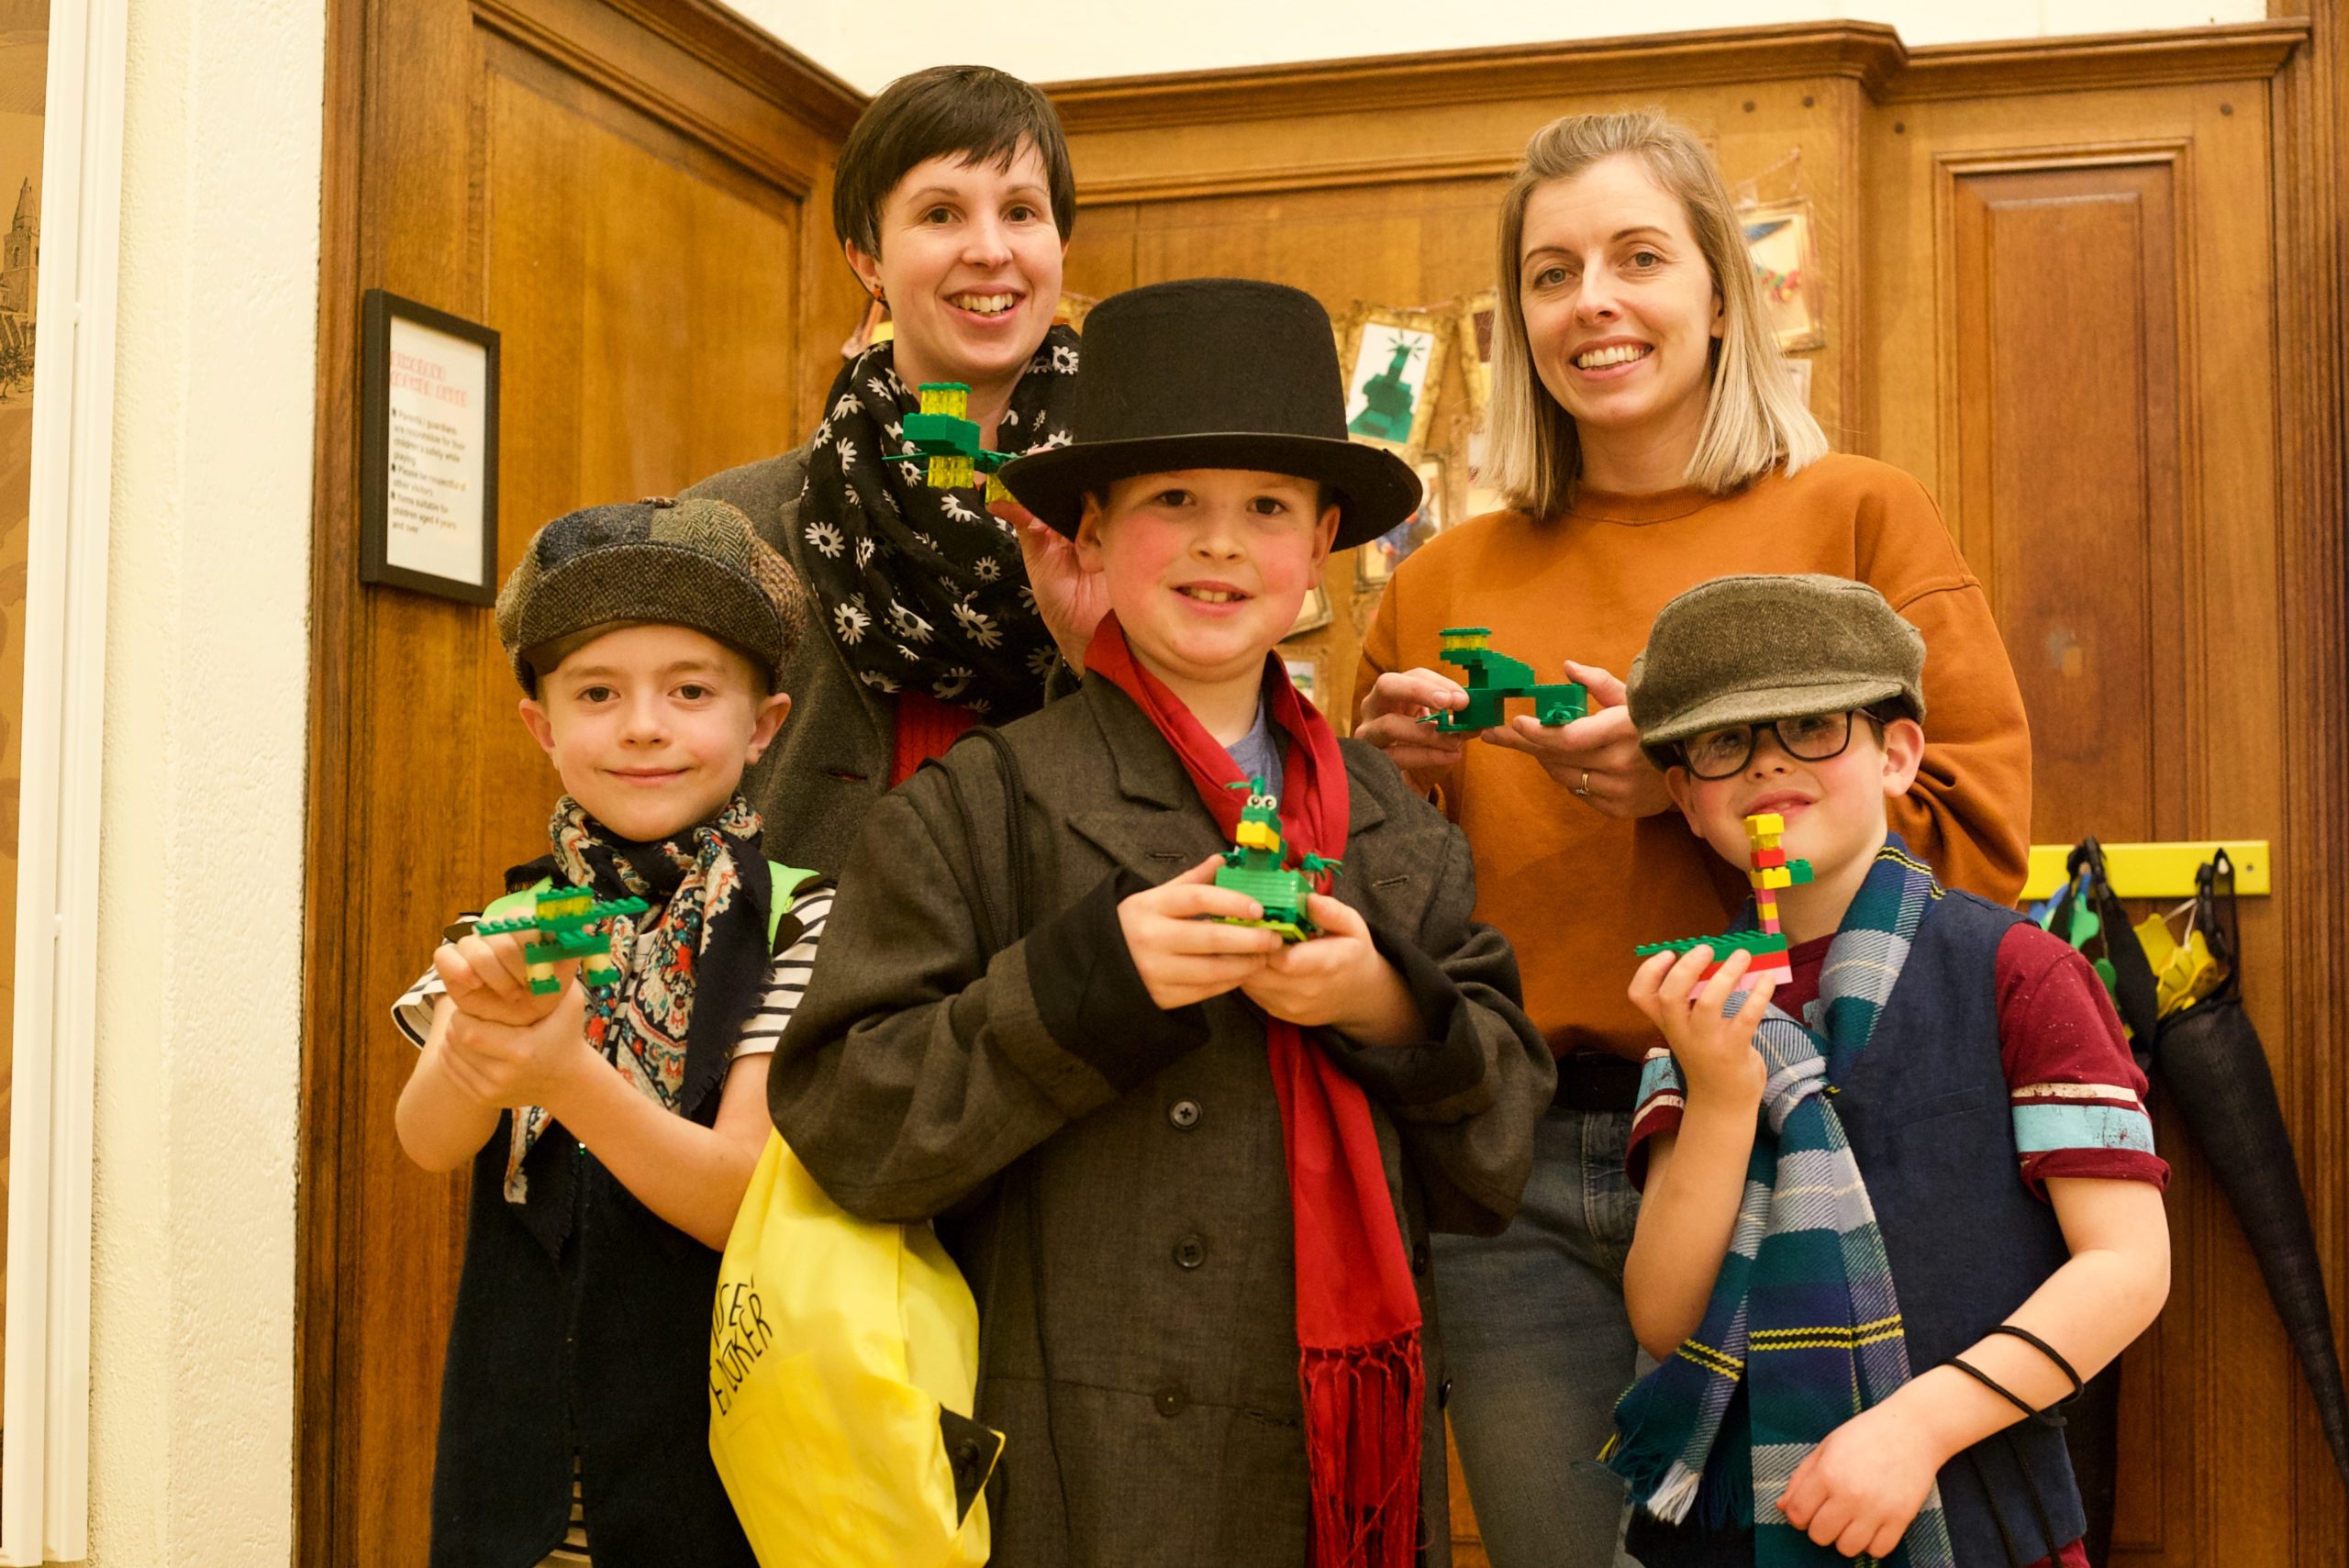 Two mothers and their three boys standing holding the lego dinosausr they designed in the hall at the Andrew Carnegie Birthplace Museum.